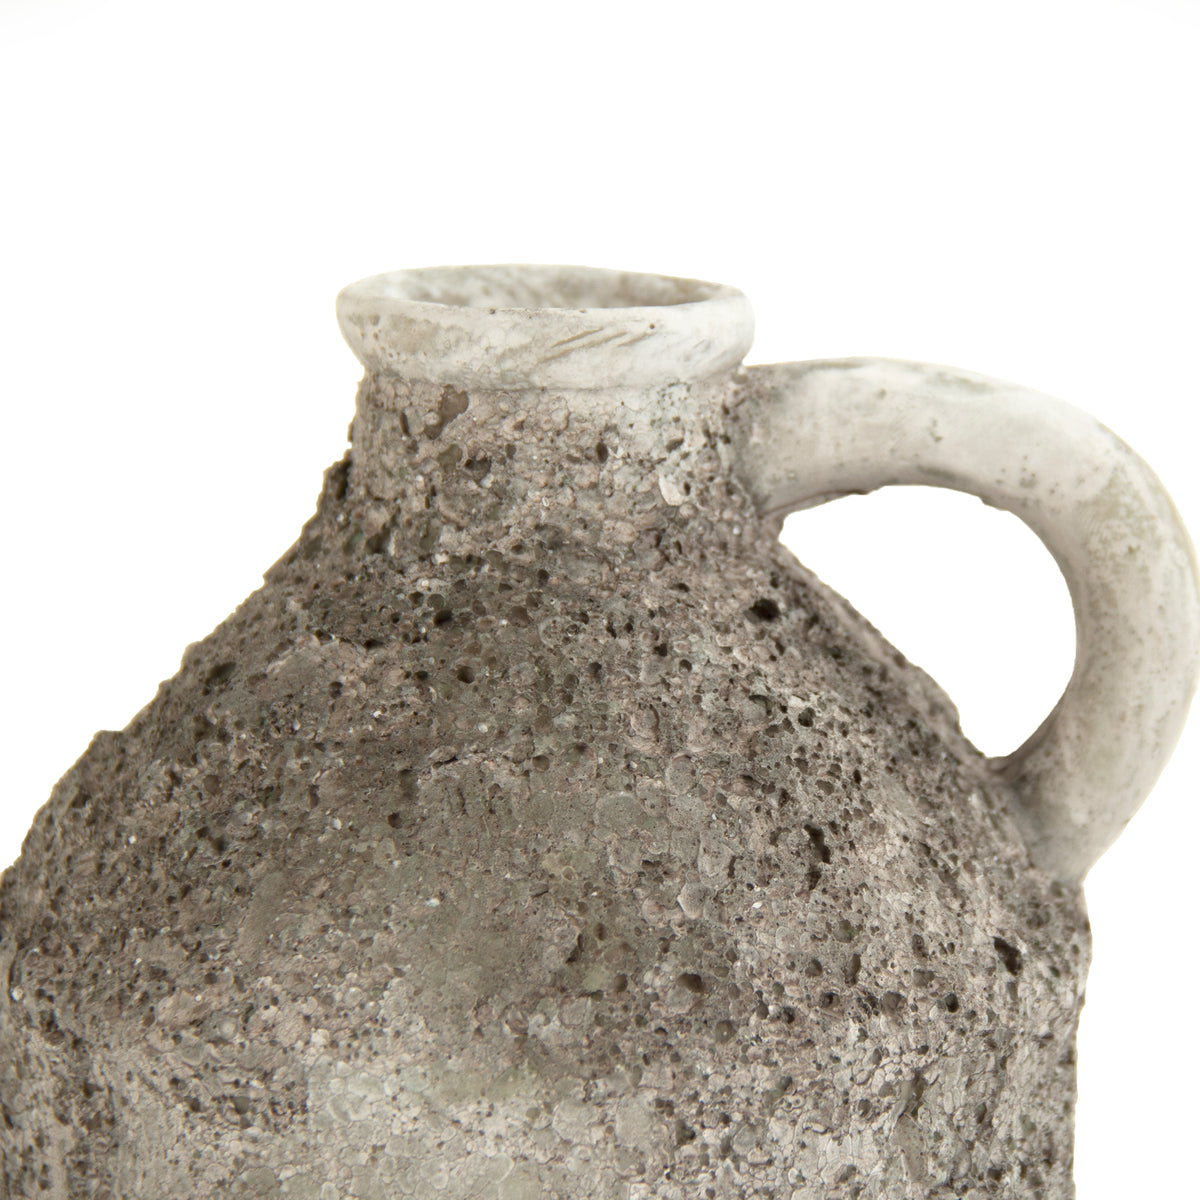 Distressed Grey Bottle (8544S A717) by Zentique